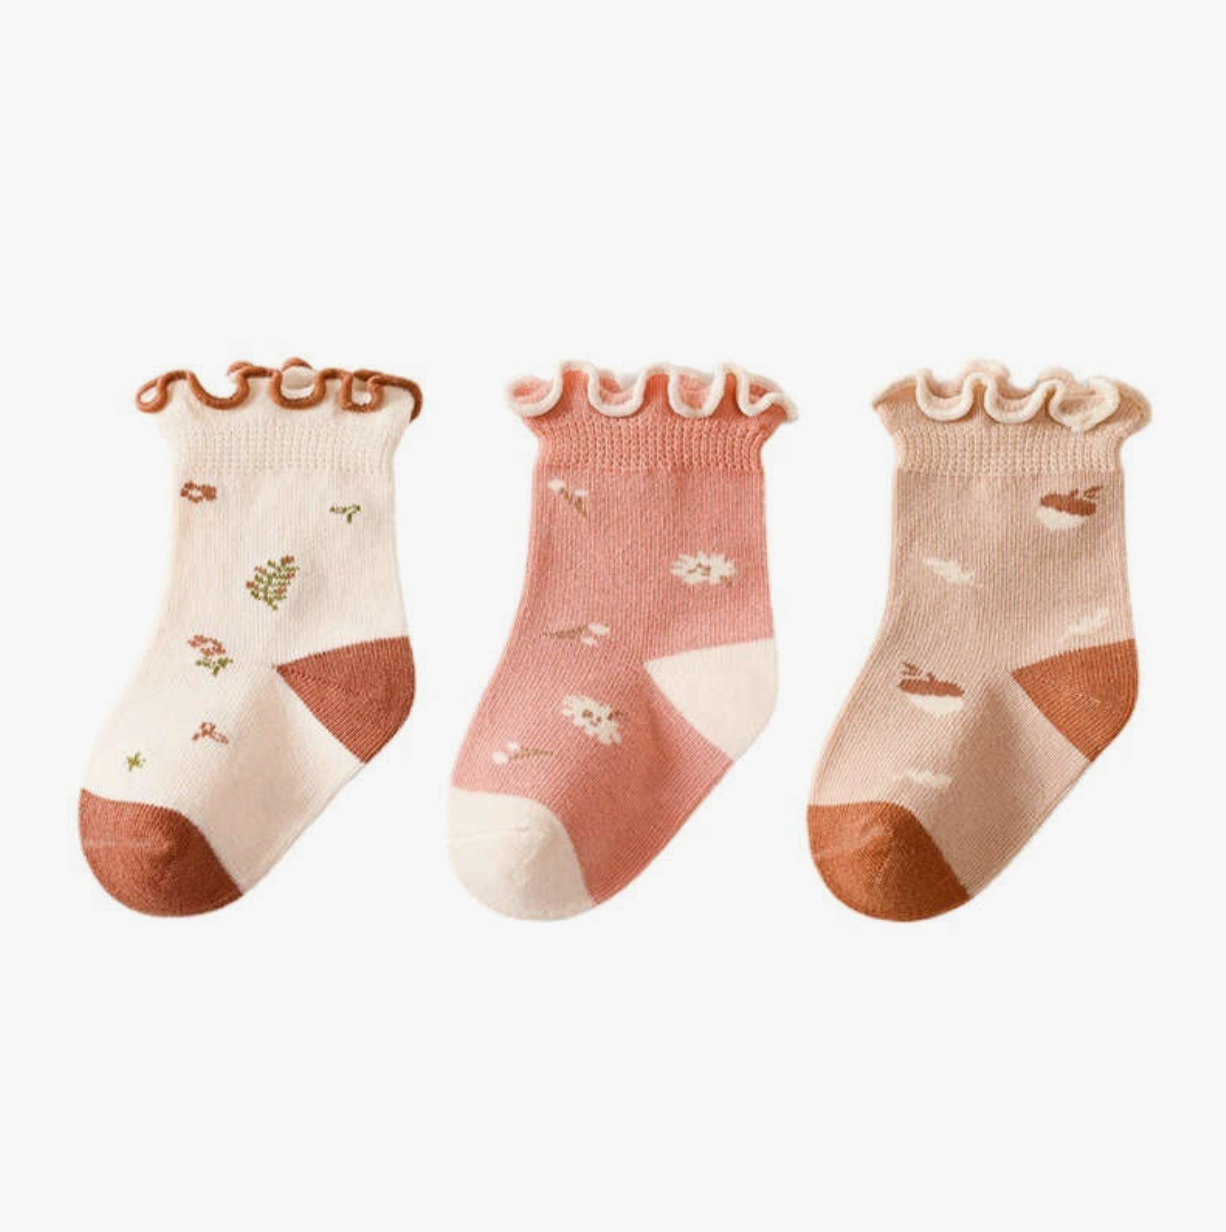 Load image into Gallery viewer, Cute Newborn Baby Socks with Wooden Ears Socks Three Pair
